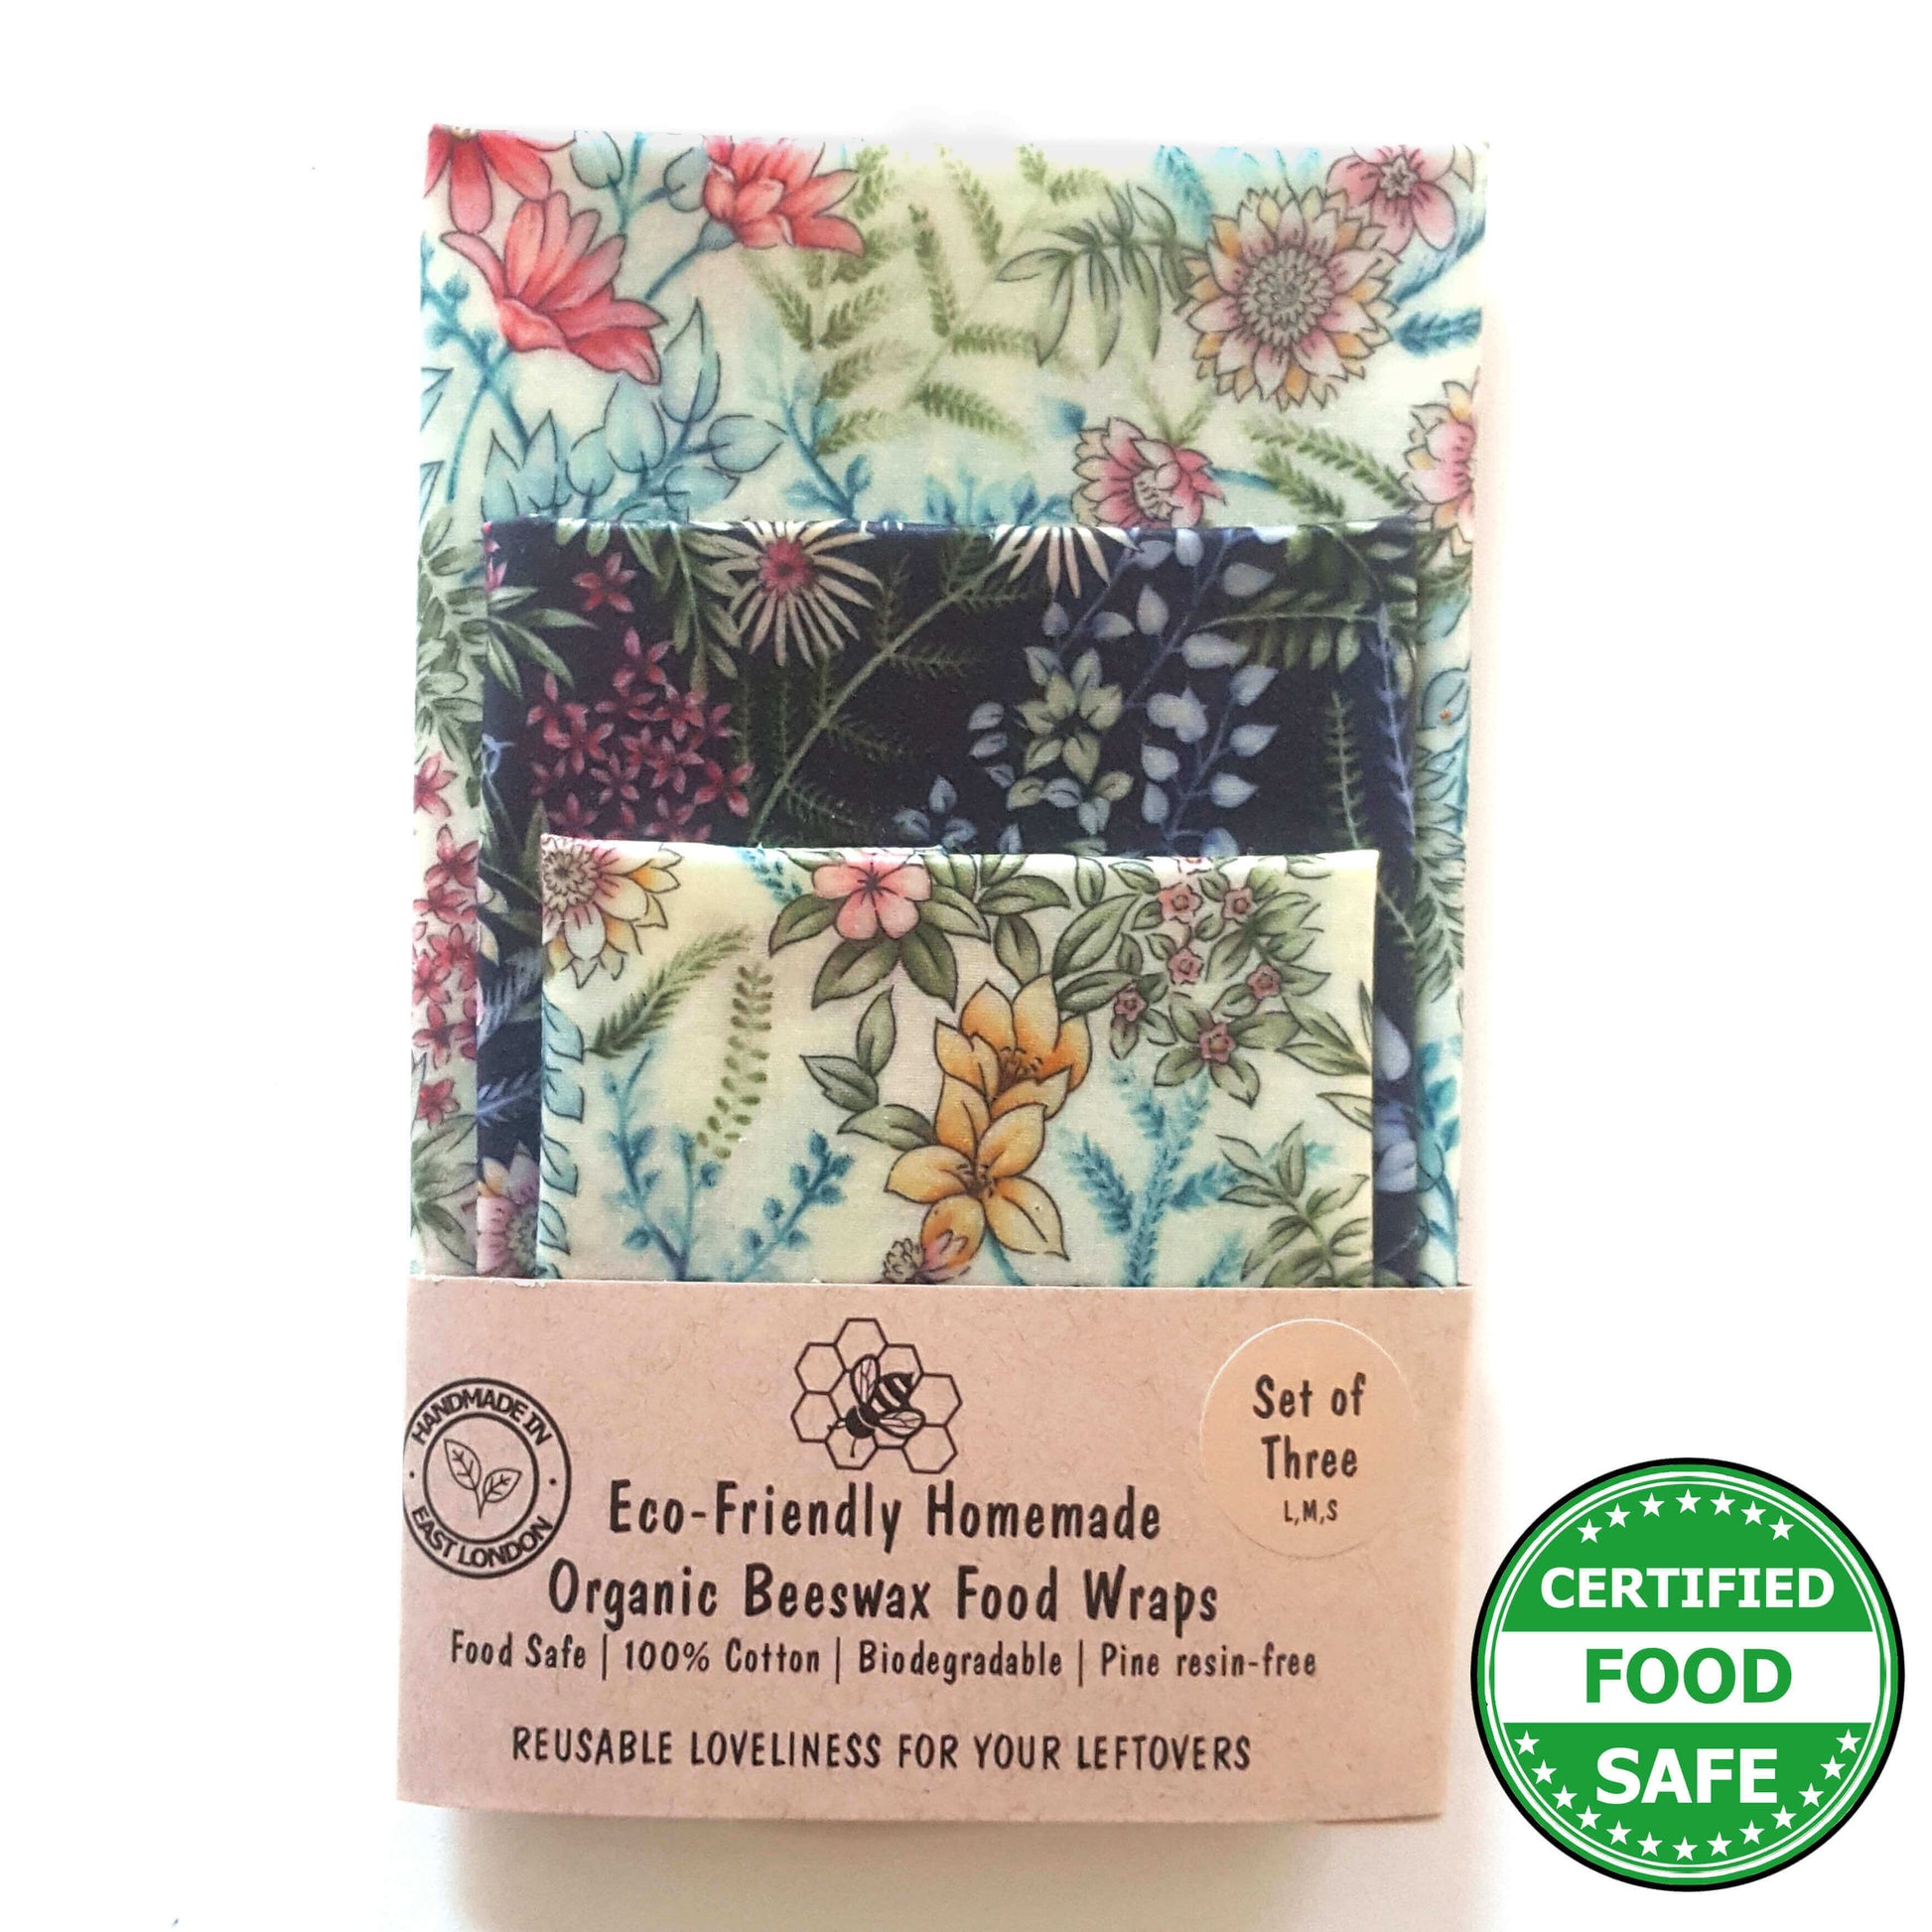 Reusable Beeswax Food Wraps 100% Hand Made in the UK by Honey Bee Good. Earth Kind Classic set of 3 in Botanical